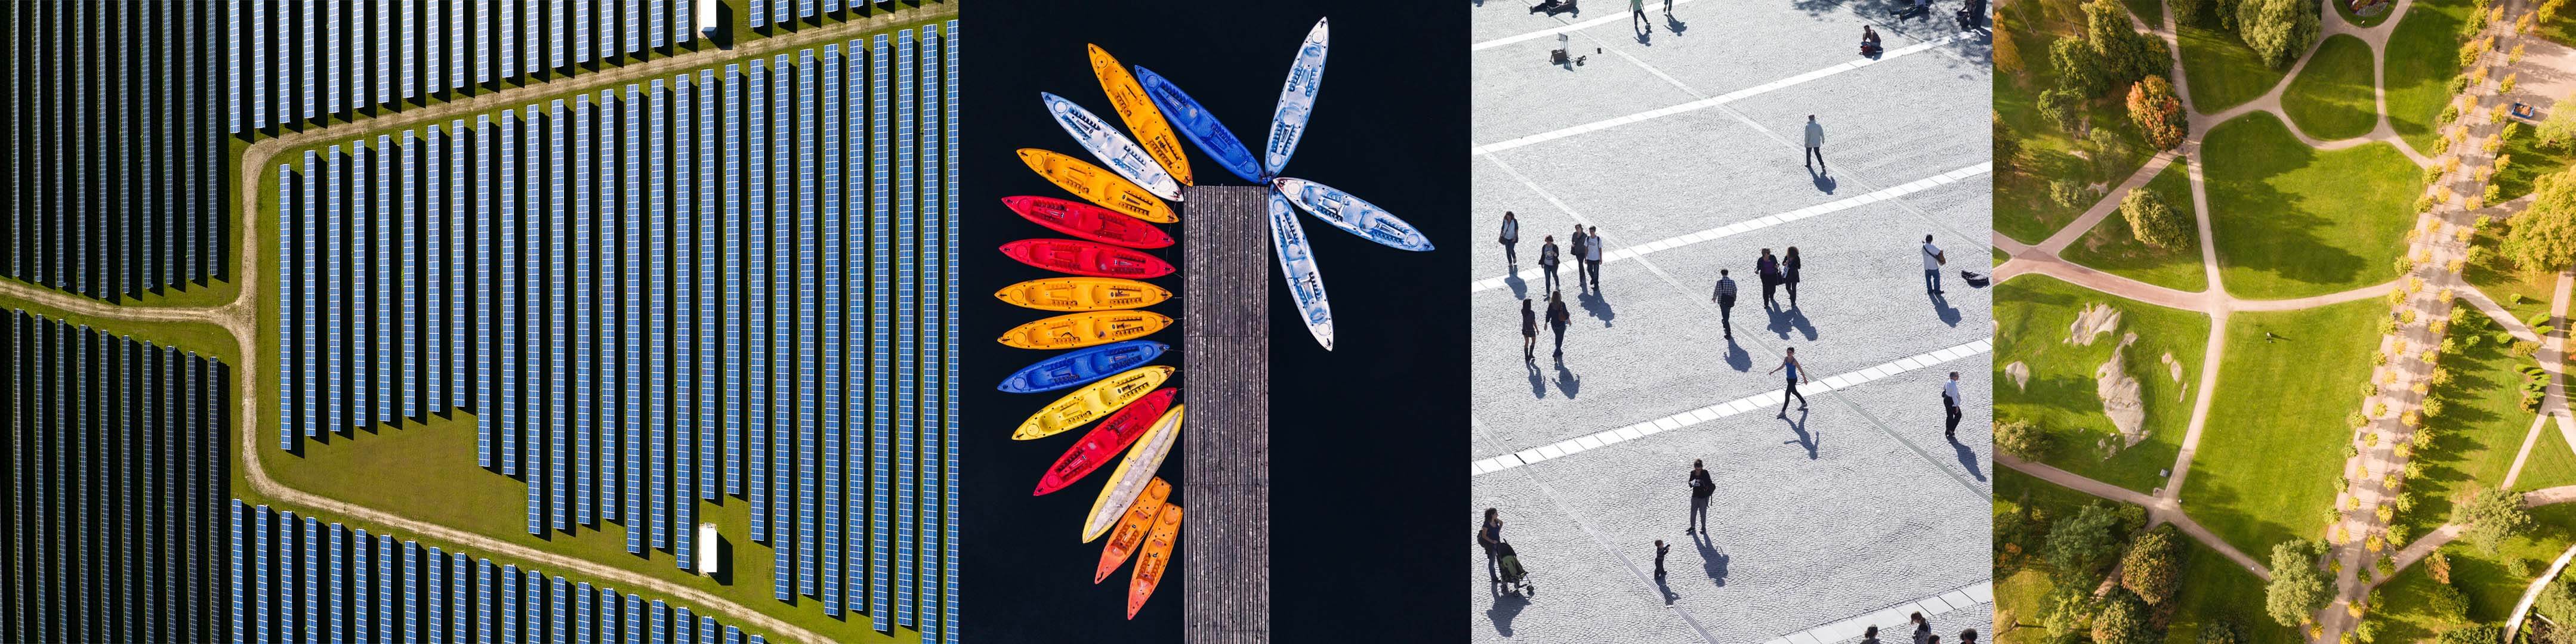 Aerial views that create abstract patterns and representations